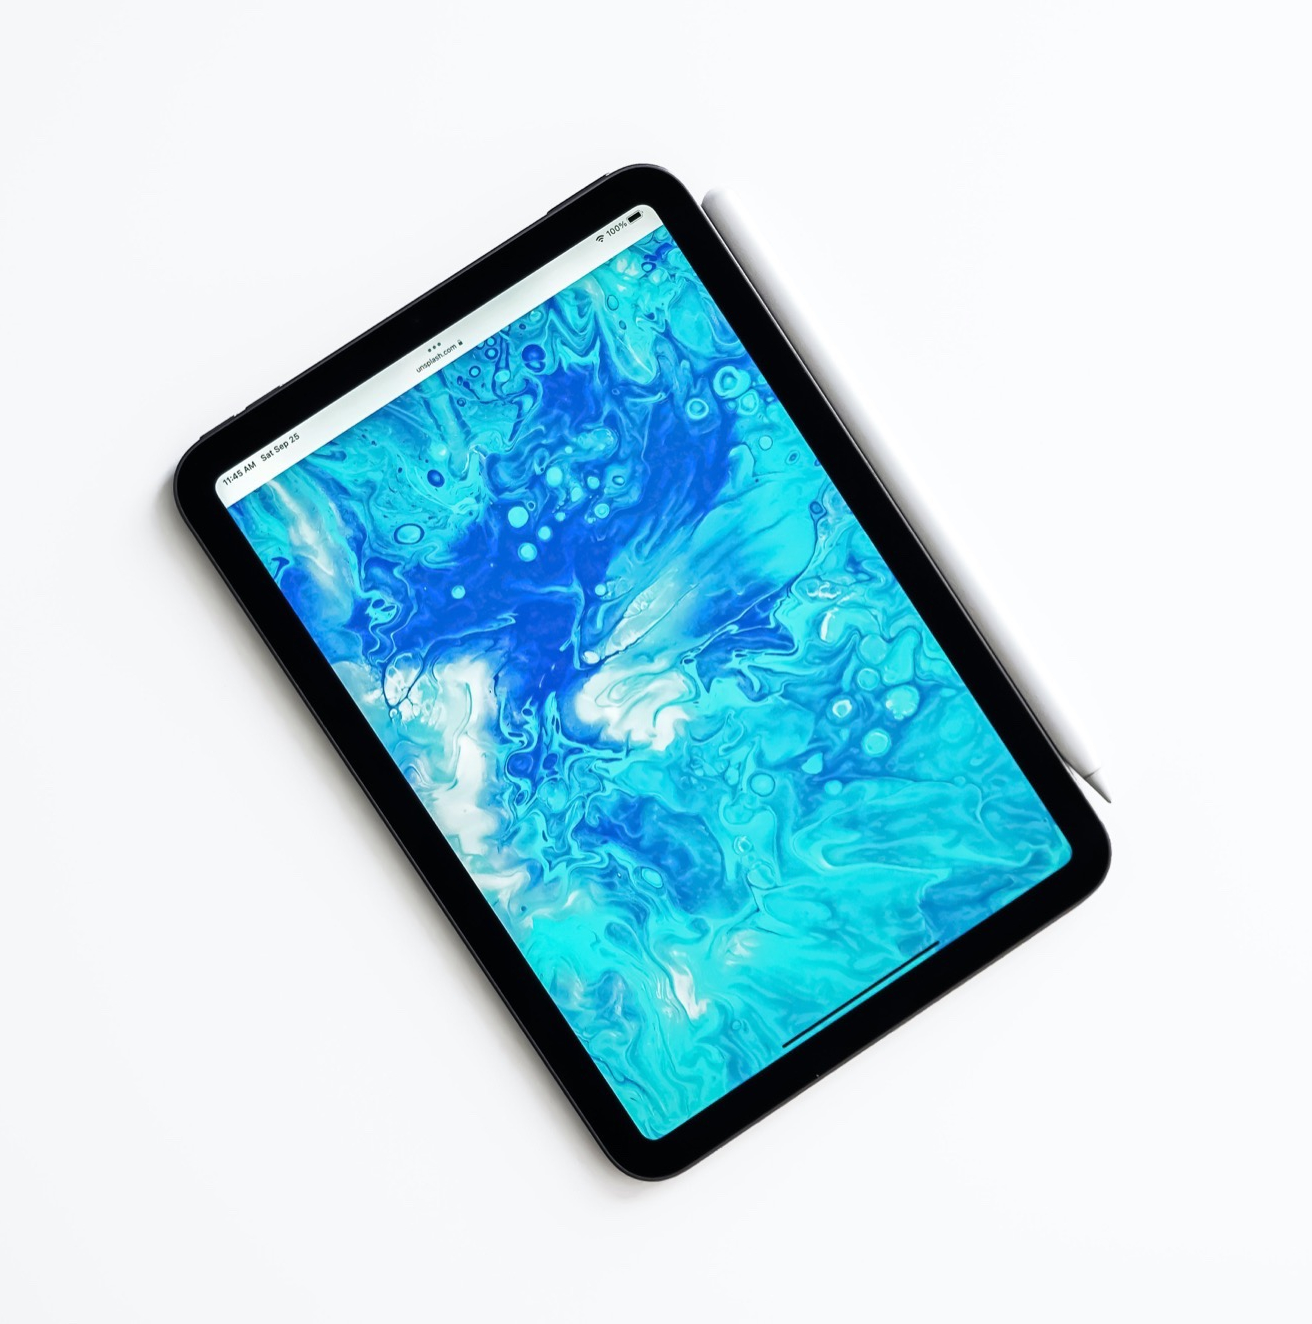 iPad Mini 6 Review: Finally a redesign